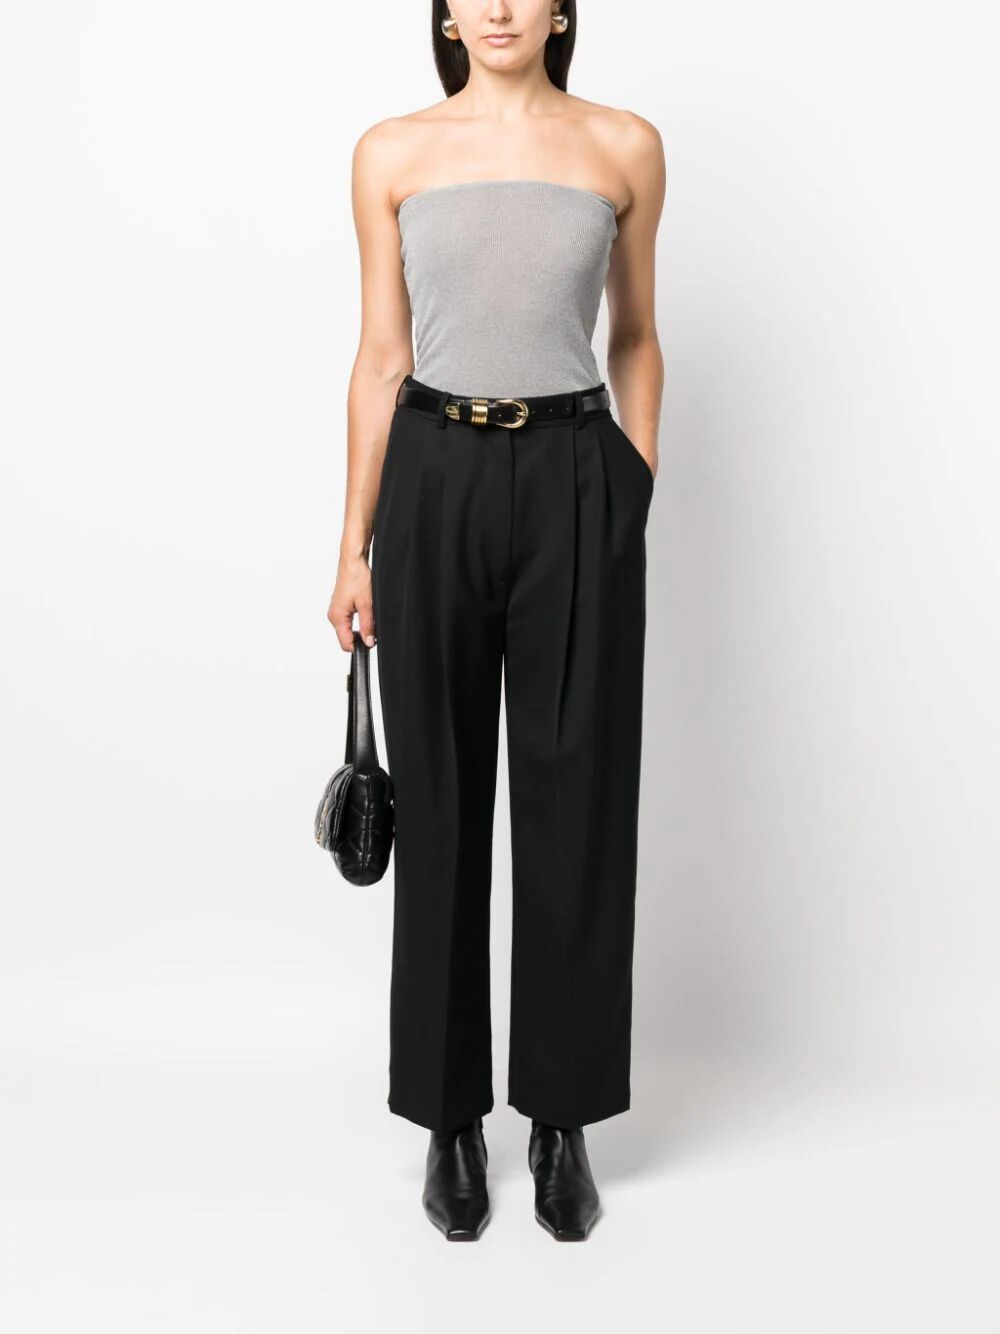 TOTEME-Double-Pleated Cropped Trousers-234WRTWBM115FB0026 BLACK 001